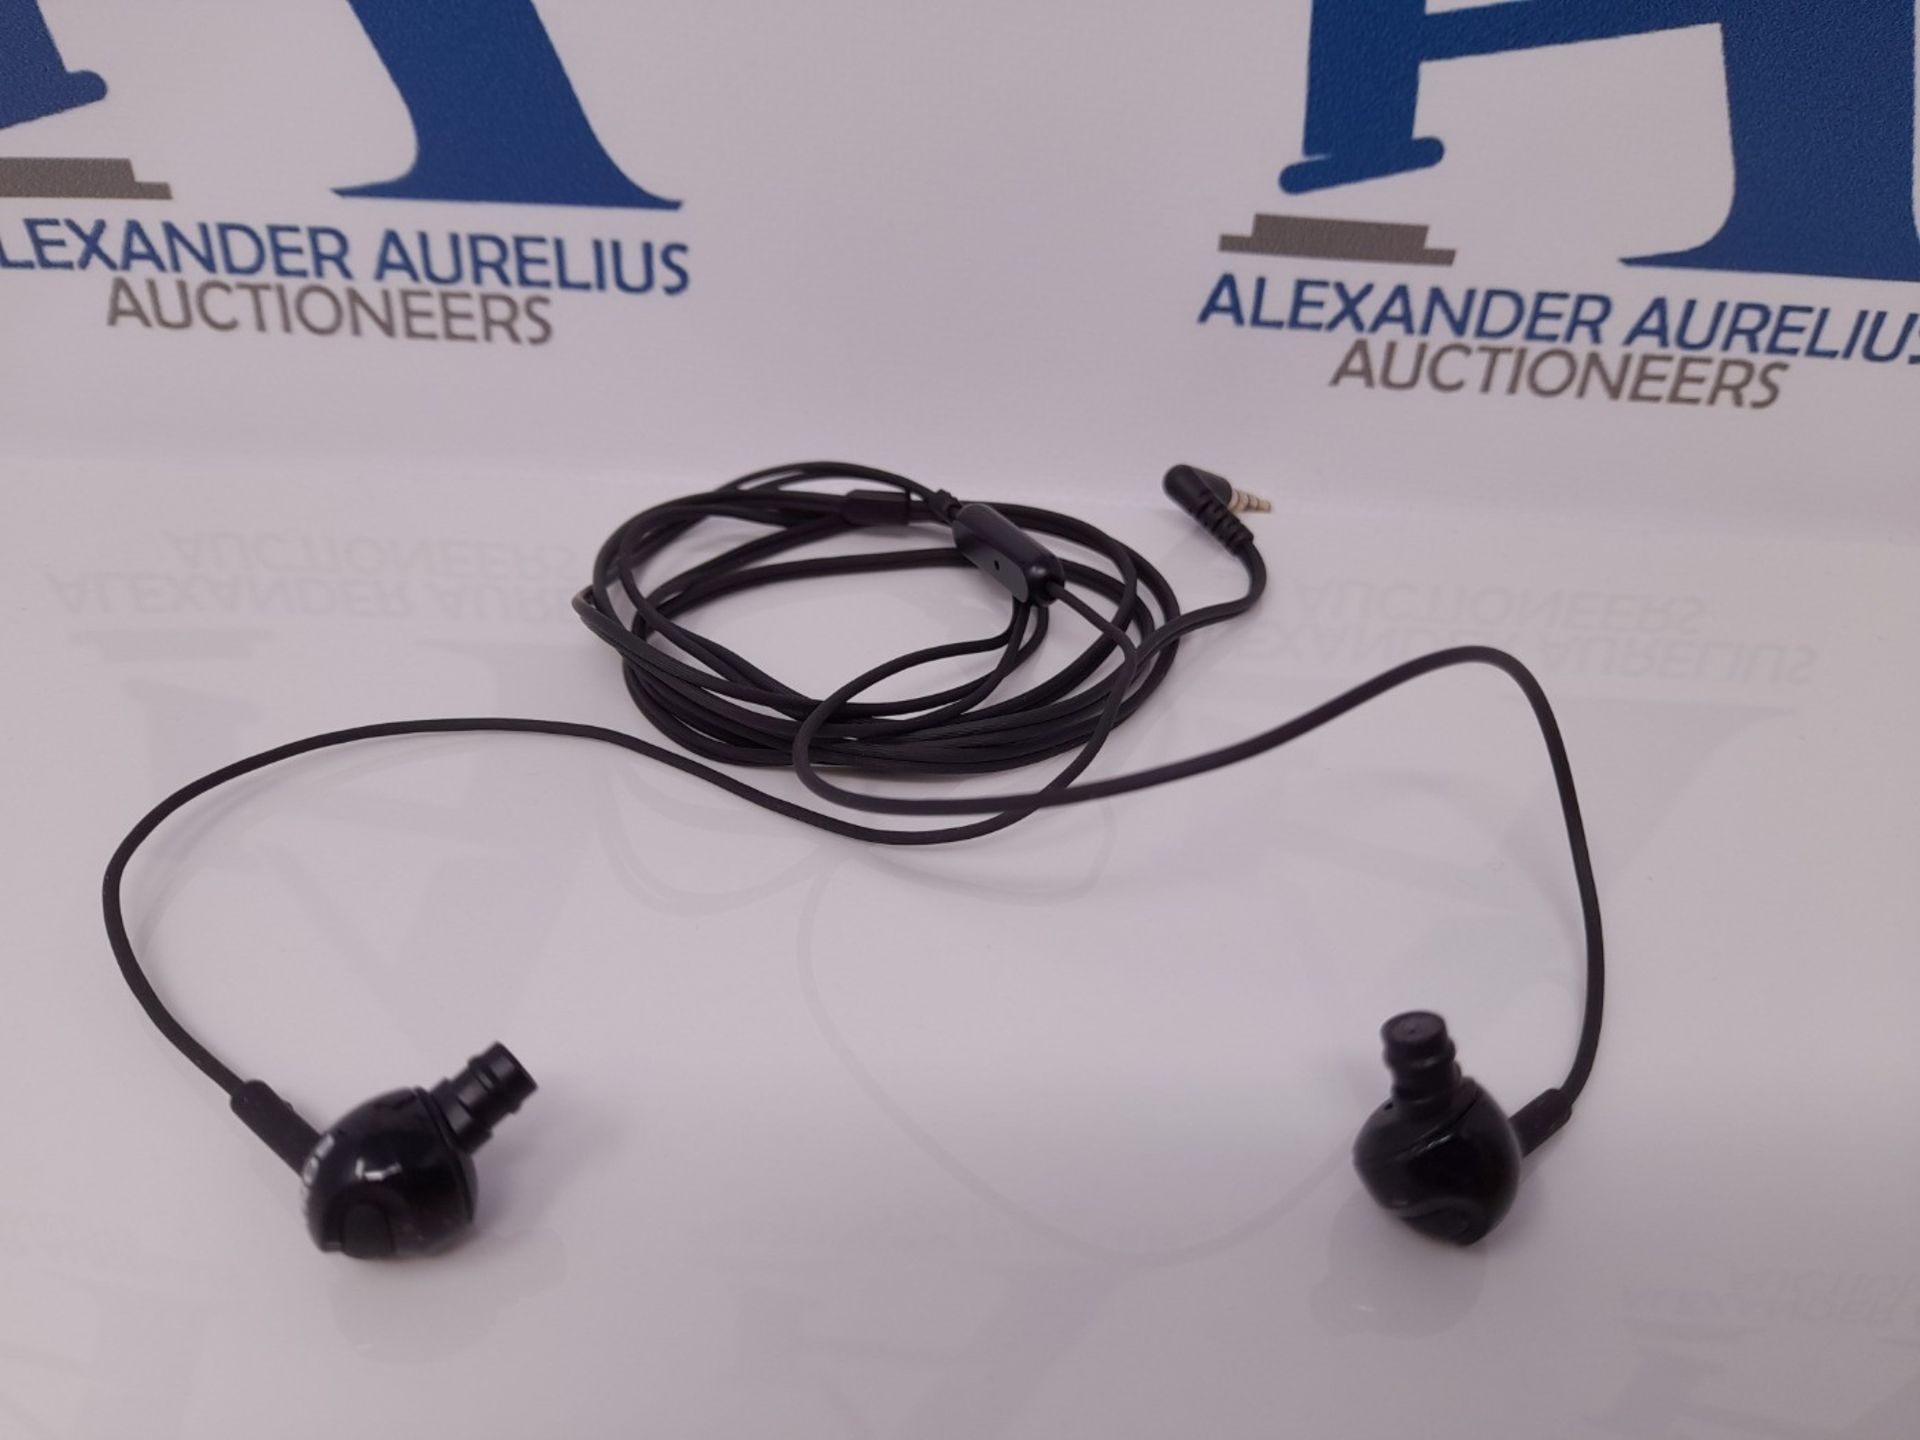 Sony MDREX110APB.CE7 Deep Bass Earphones with Smartphone Control and Mic - Metallic Bl - Image 2 of 3